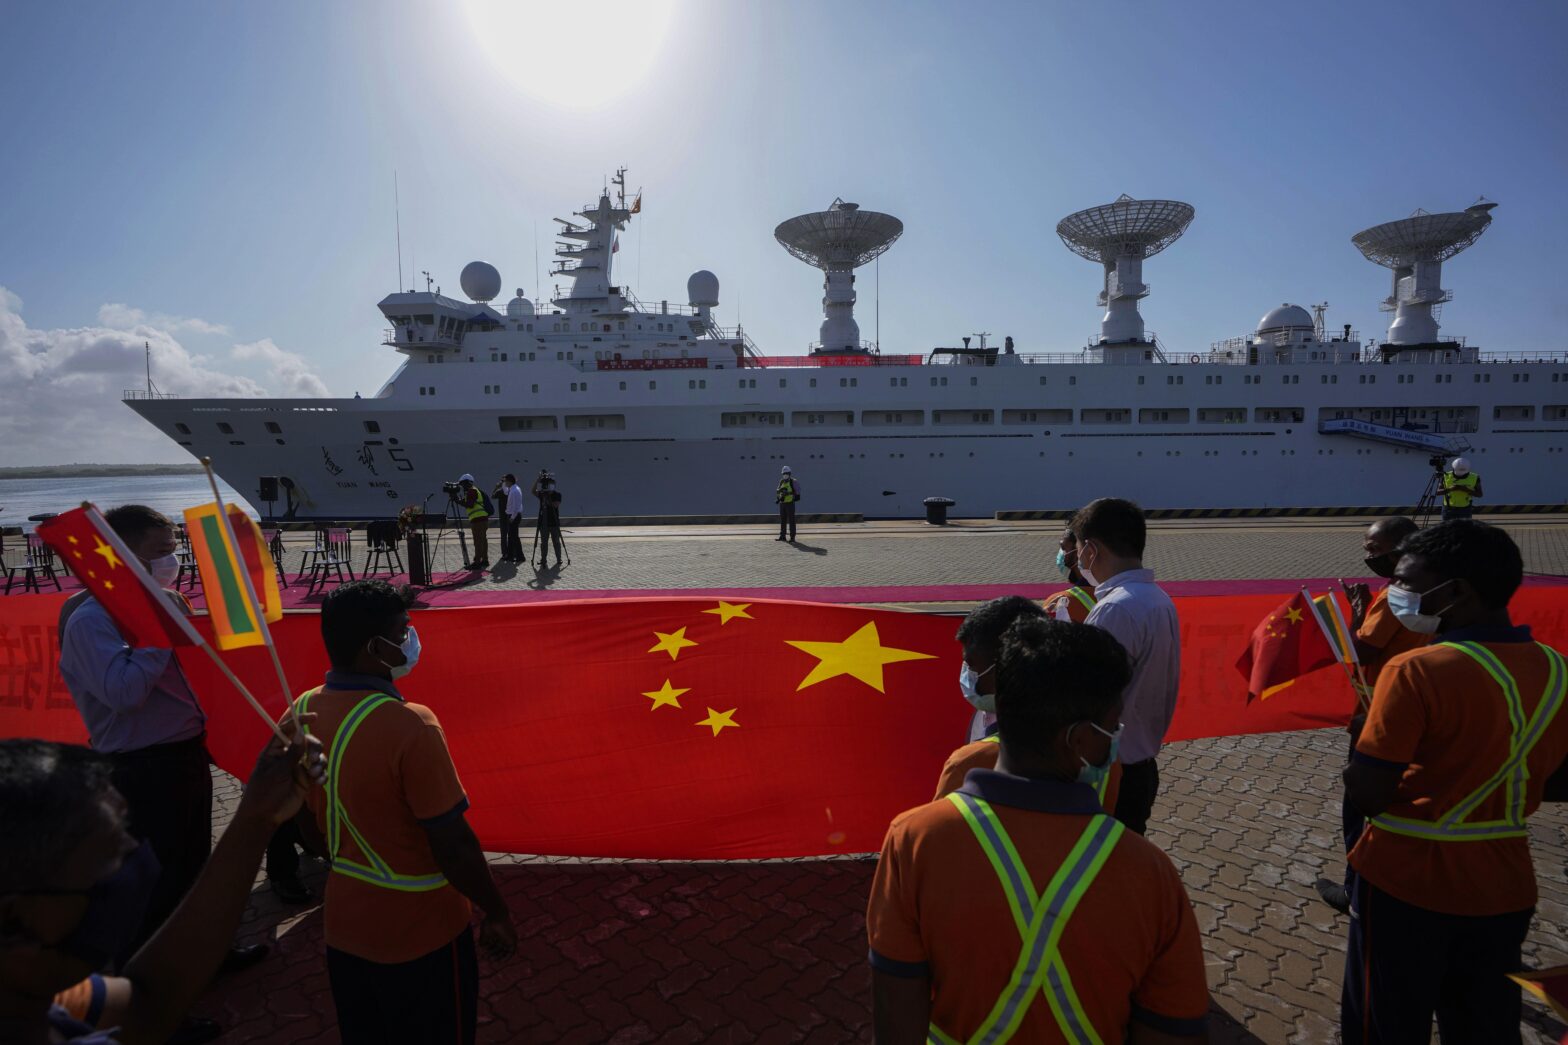 Indian media hyping Chinese research ship docking in Sri Lanka sensational claim: Experts